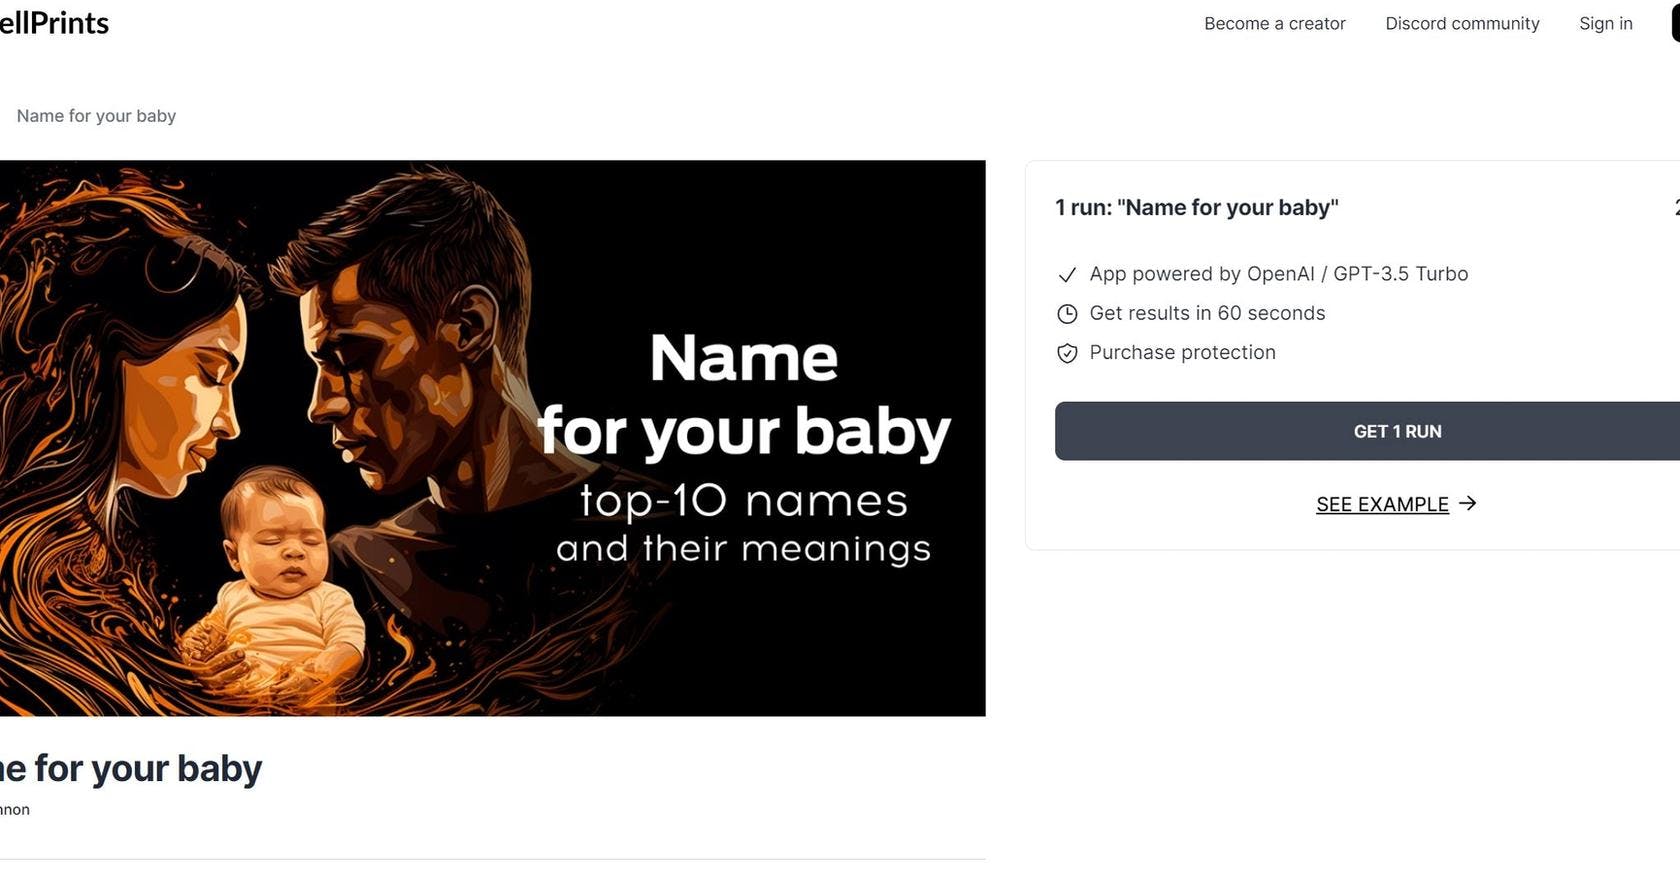 Name for your baby